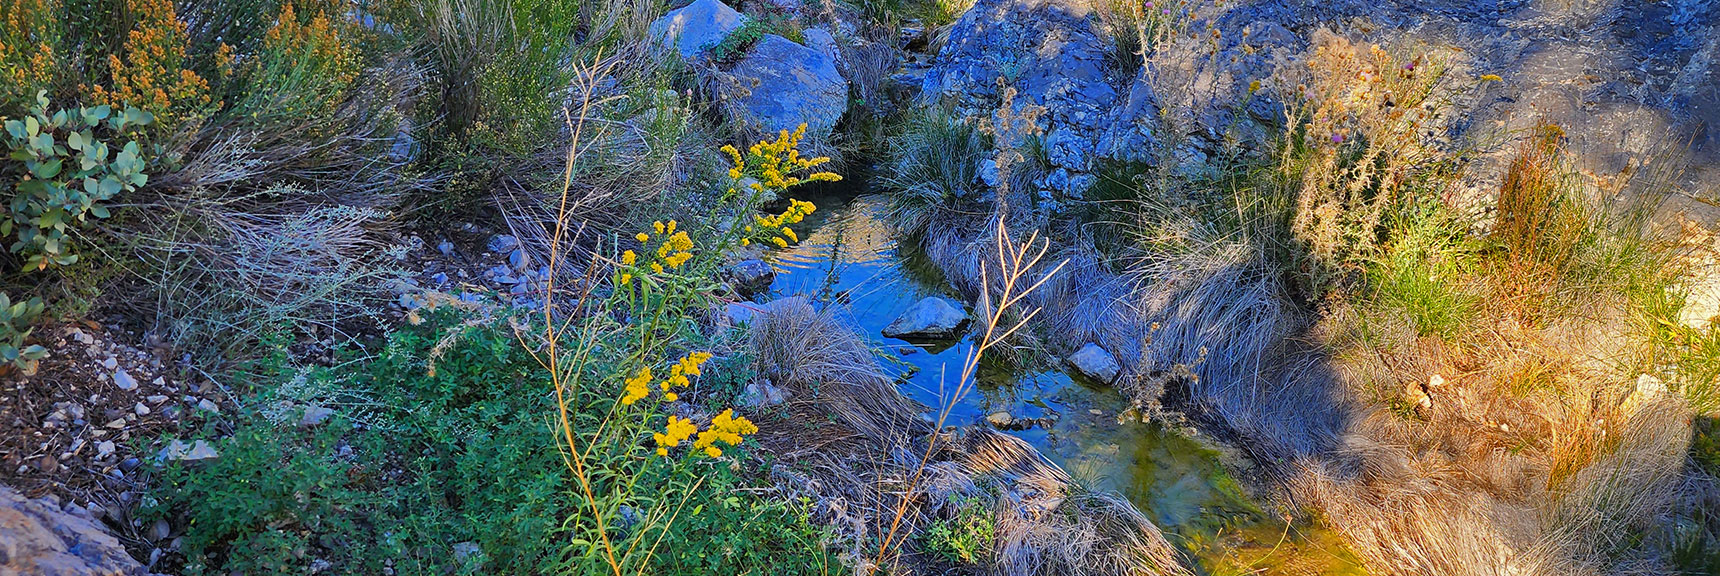 It's a Beautiful, Peaceful Year-Round Spring with Lush Vegetation | Switchback Spring Ridge | Red Rock Canyon, Nevada